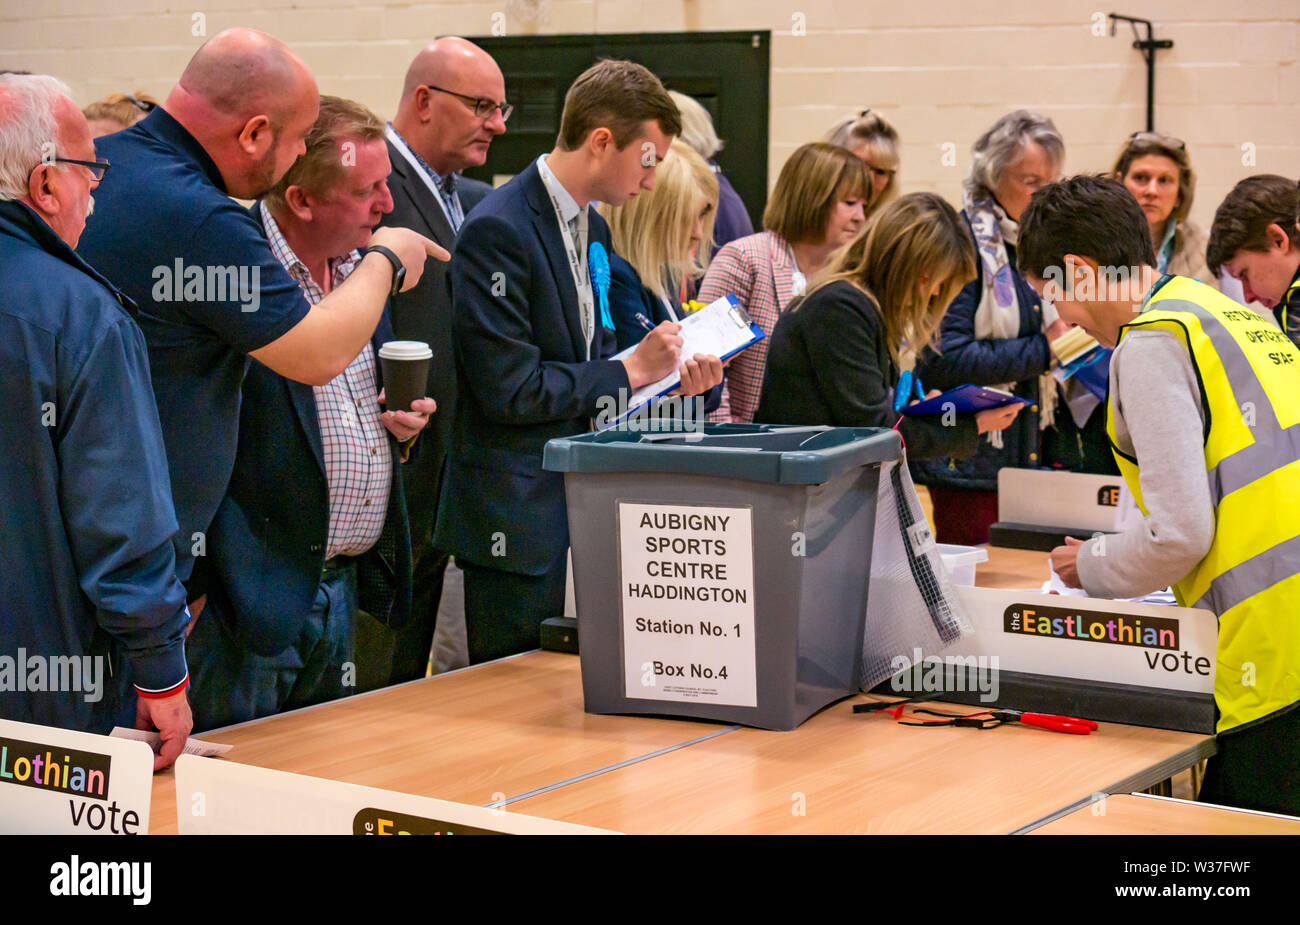 Votes being counted, Ward 5 Council election, Haddington & Lammermuir by-election, East Lothian May 2019, Scotland, UK Stock Photo